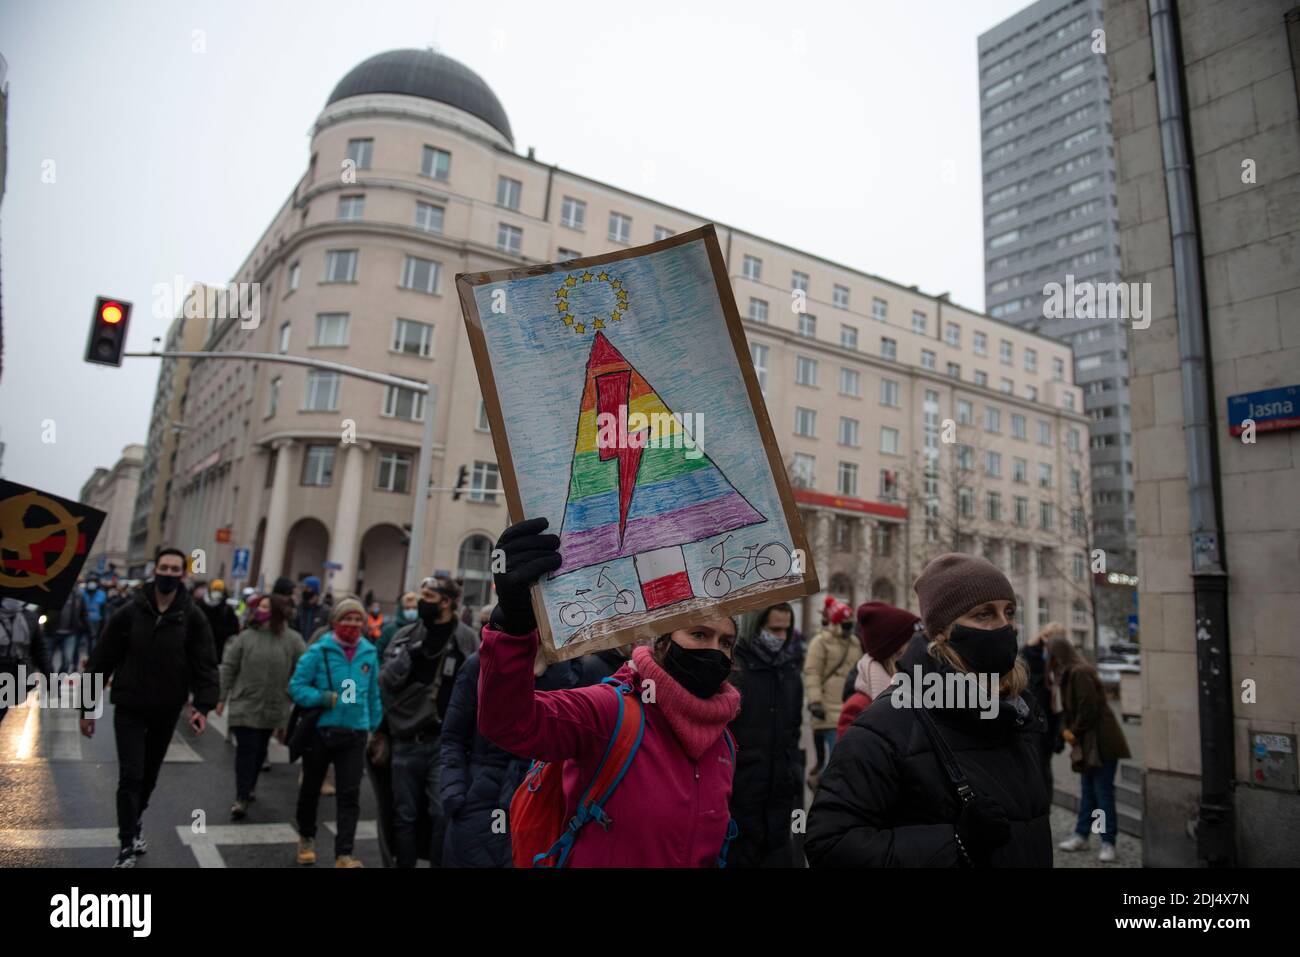 Warsaw, Warsaw, Poland. 13th Dec, 2020. A demonstrator holds a sign during an anti-government protest on December 13, 2020 in Warsaw, Poland. Several thousands of people took to the streets of Warsaw in the ongoing protest against the ruling of Poland's top court that would impose a near total ban on abortion. The protests organised by Strajk Kobiet (Women Strike), a group of women's rights activists, turned into anti government protests gathering people from different social and economic groups. On December 13 Poles also remember the introduction of martial law by the authoritarian Pol Stock Photo